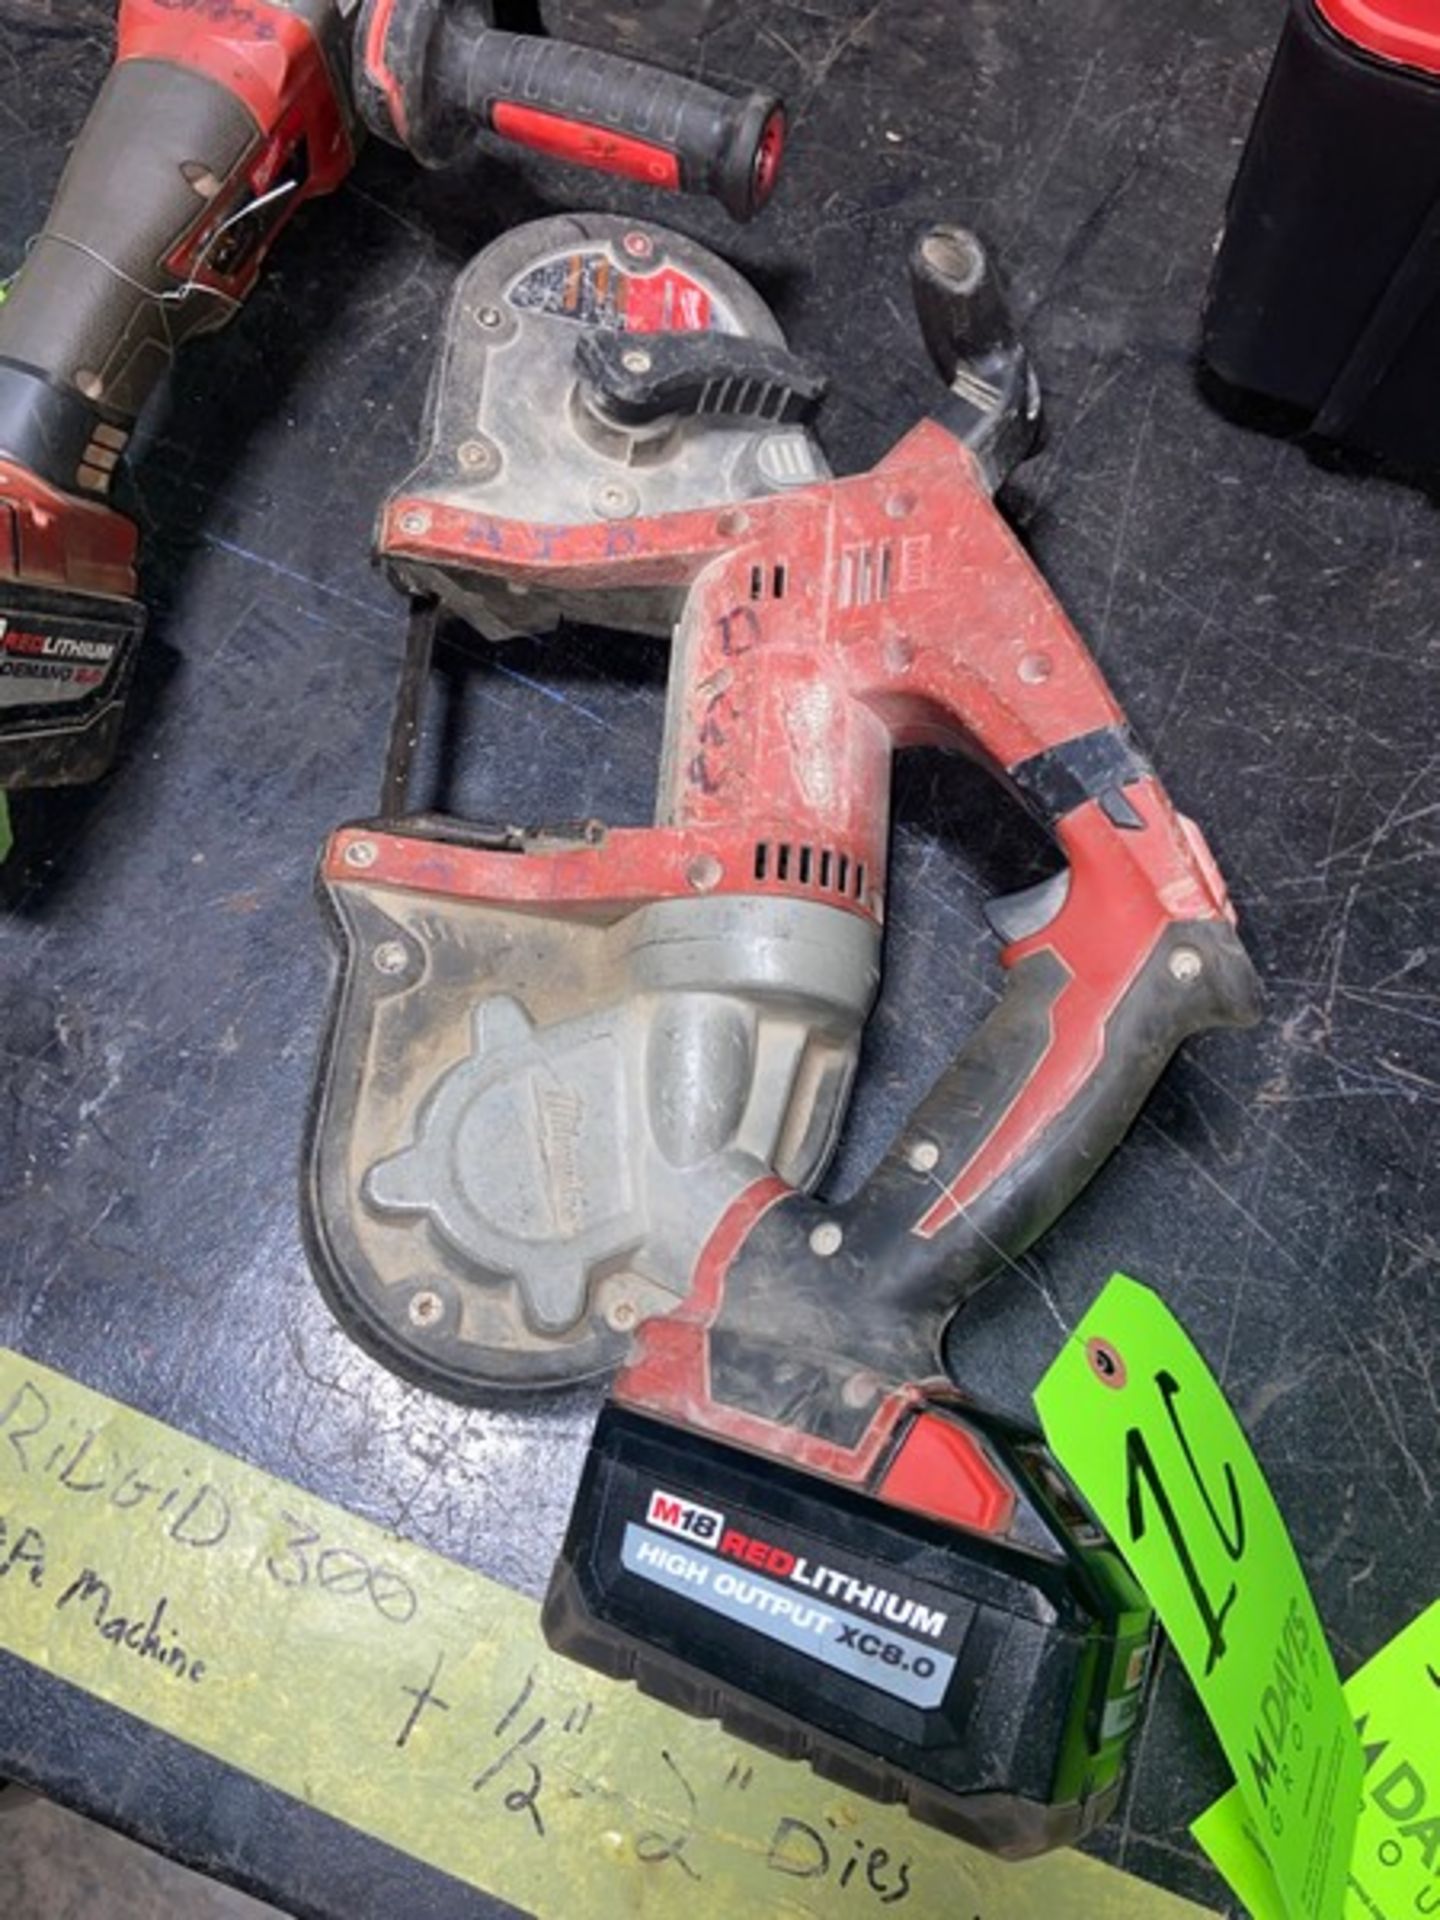 Milwaukee Cordless Band Saw, with Red Lithium Battery (LOCATED IN MONROEVILLE, PA)